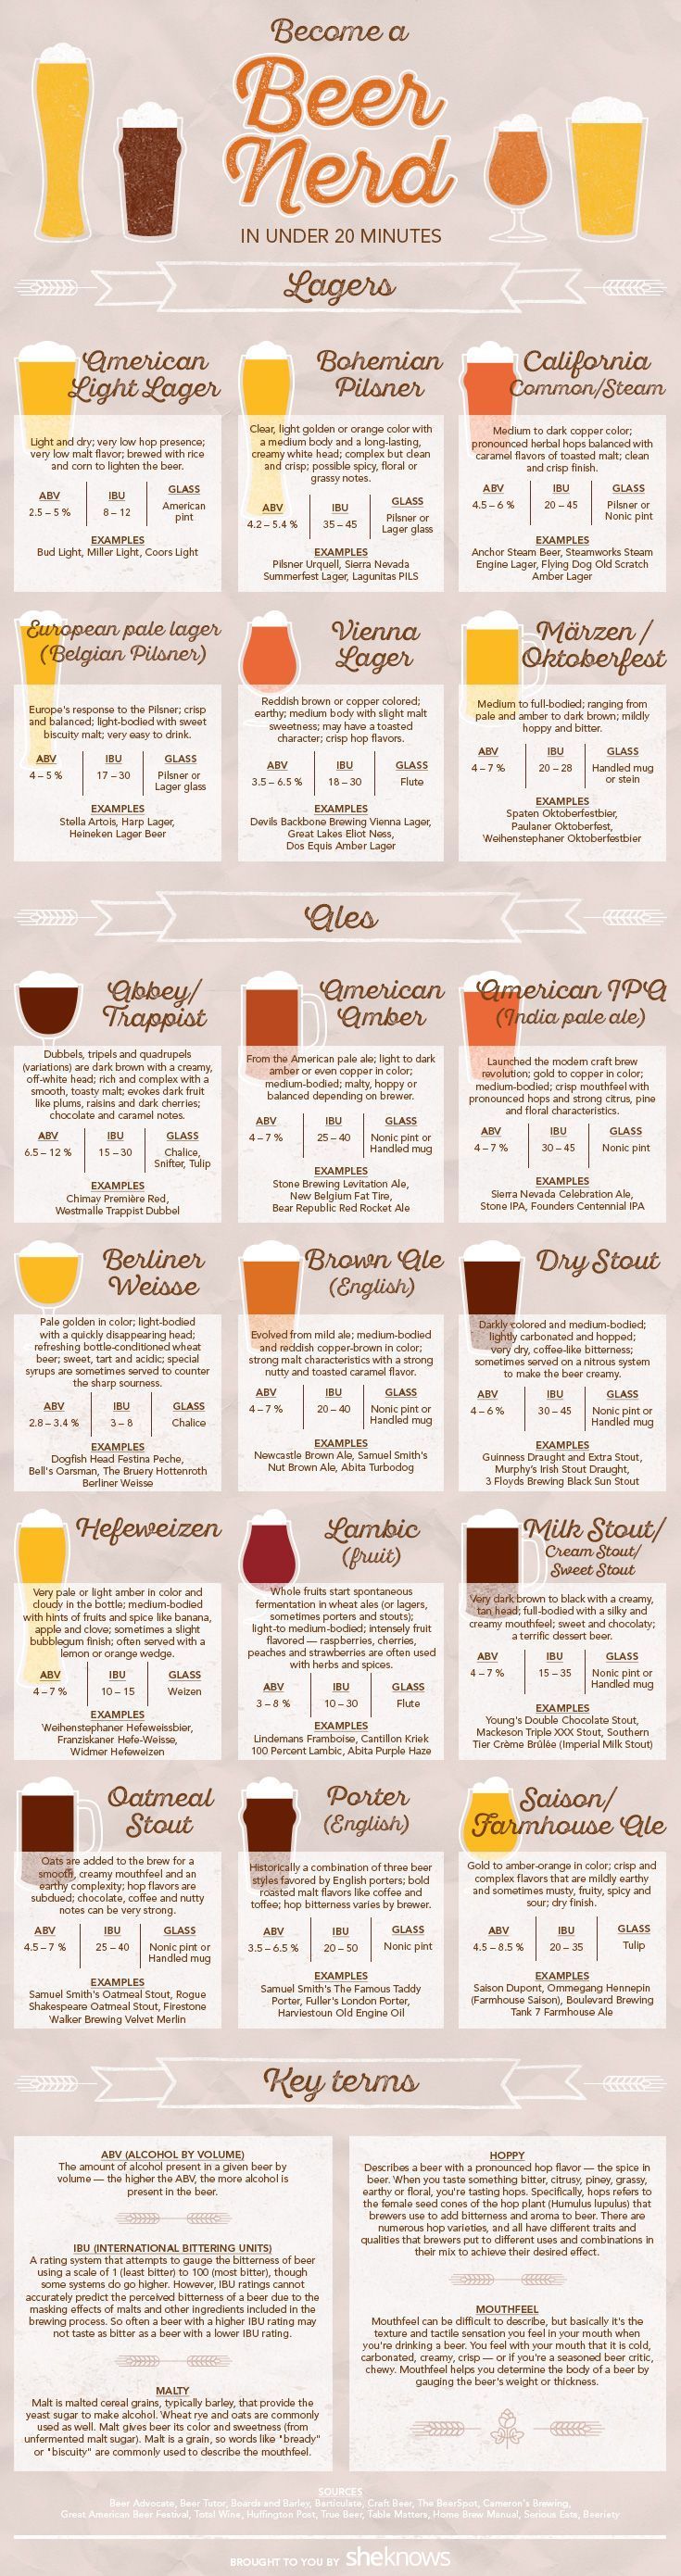 Your guide to good beer, proper glassware and talking like a connoisseur – Infographic and design made for